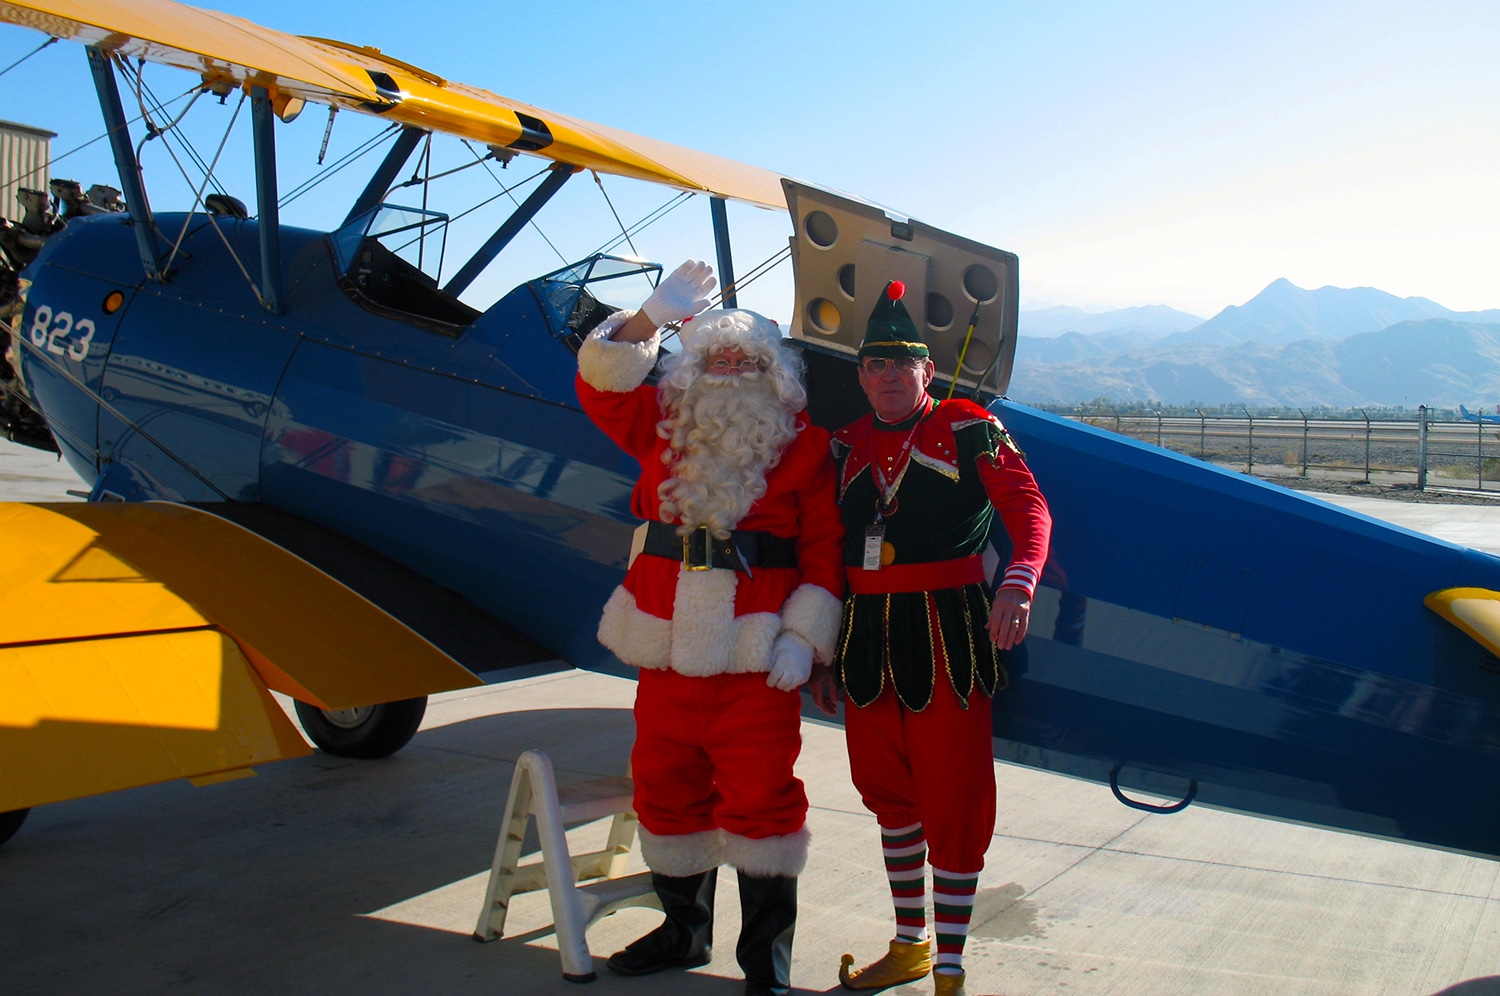 Santa-fly in at Palm Spings Air Museum x1500